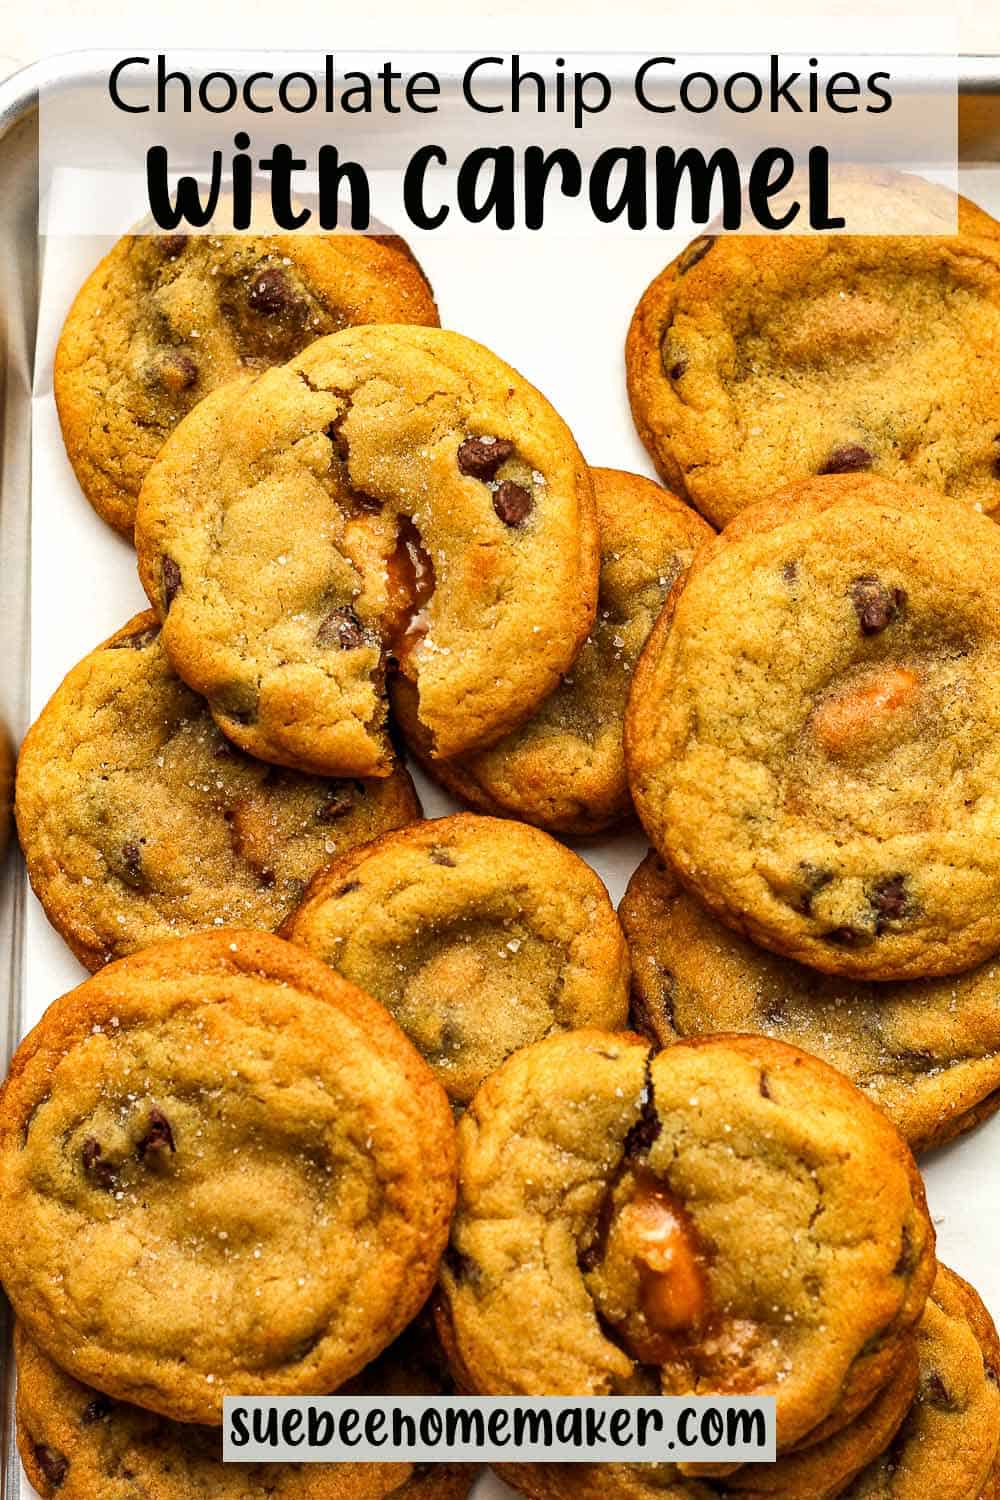 Overhead view of chocolate chip cookies with caramel